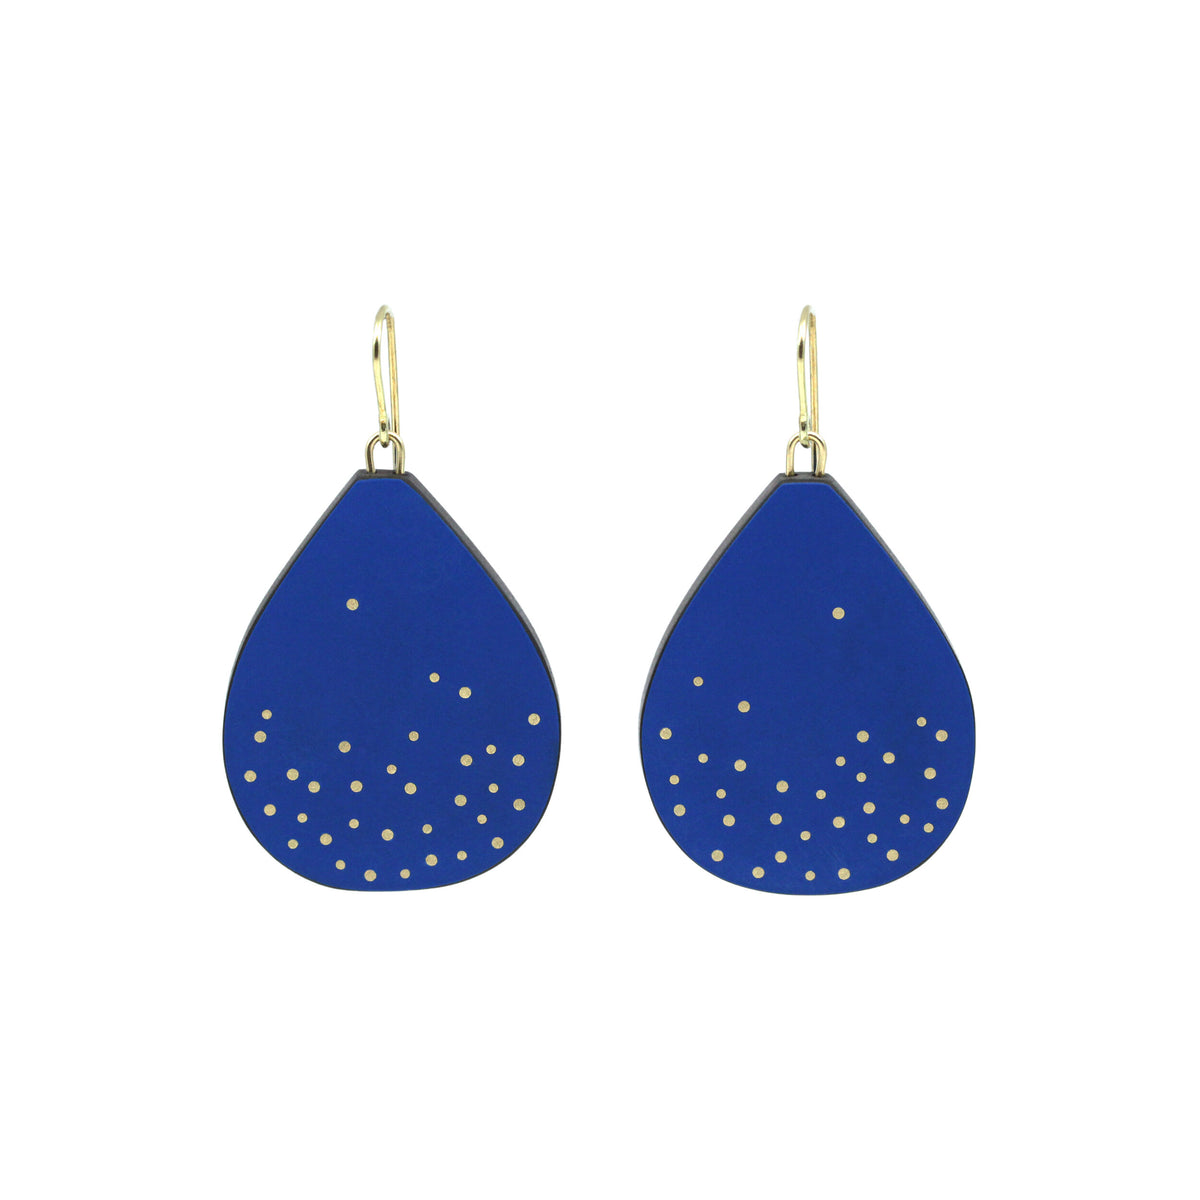 Blue and 18ct gold bulb earrings